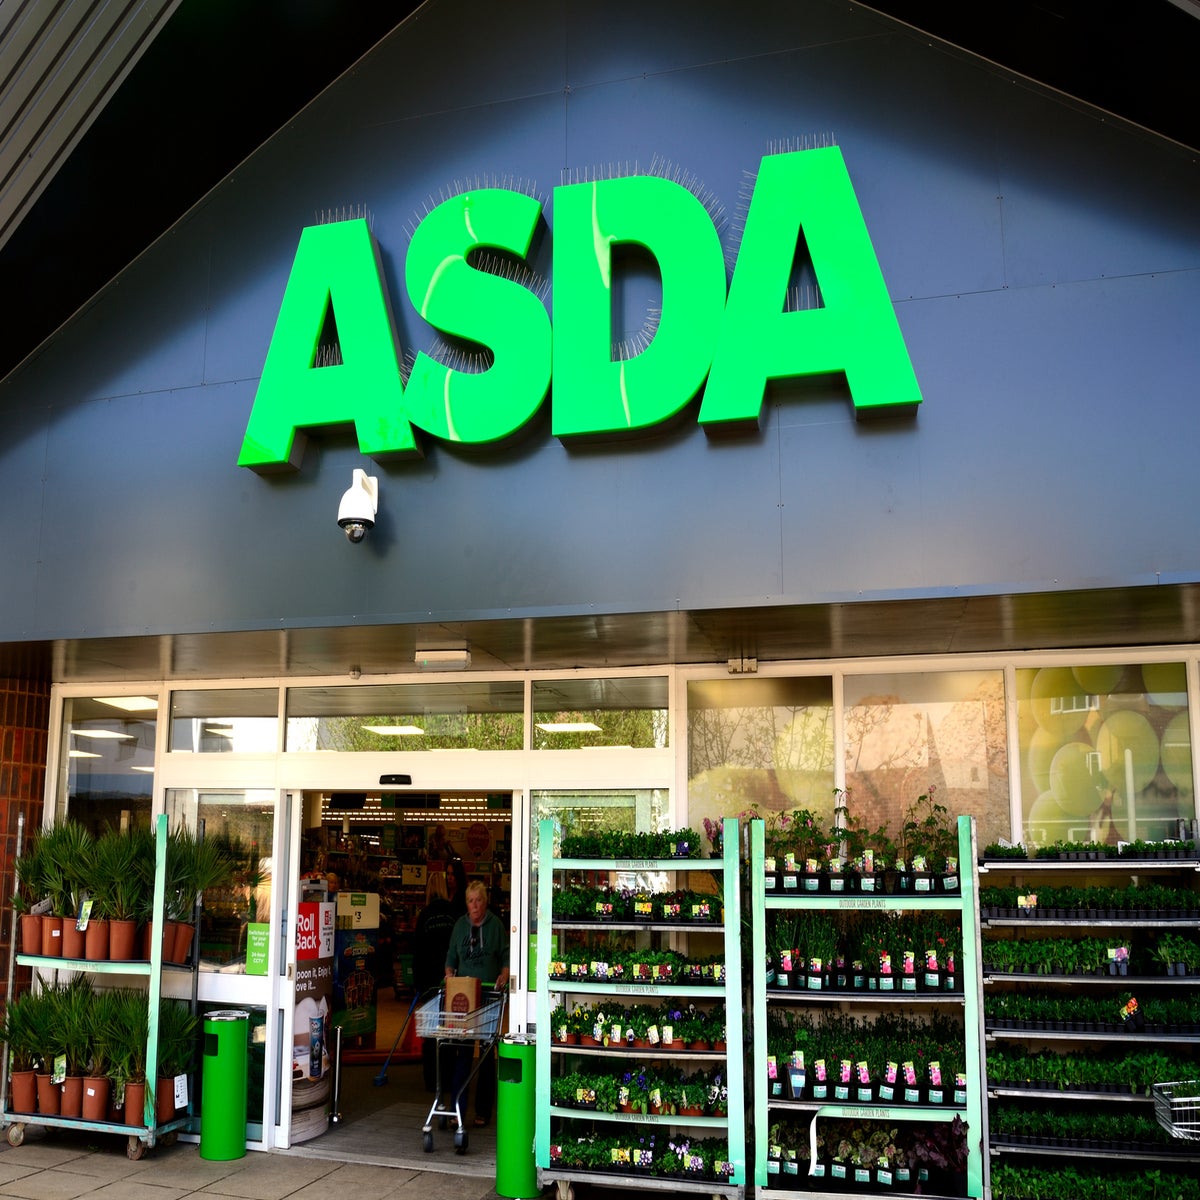 Up to 12,000 Asda workers could lose jobs amid contract row, Asda